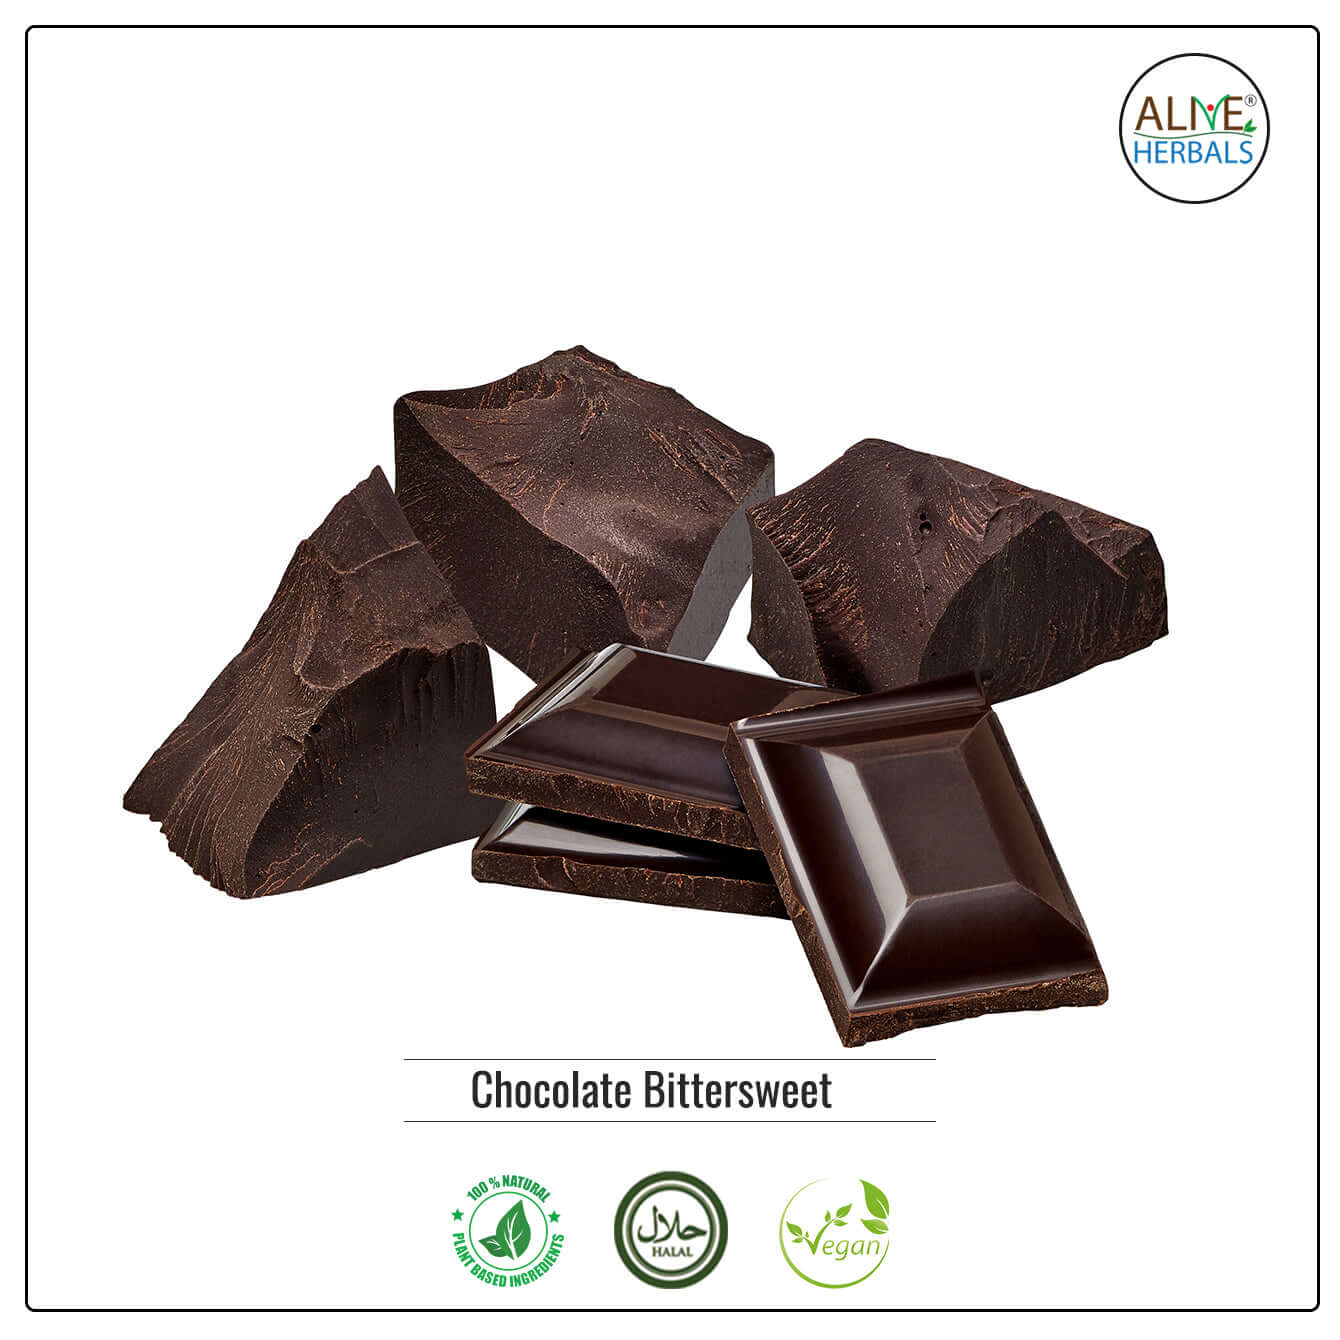 Chocolate Bittersweet - Shop at Natural Food Store | Alive Herbals.